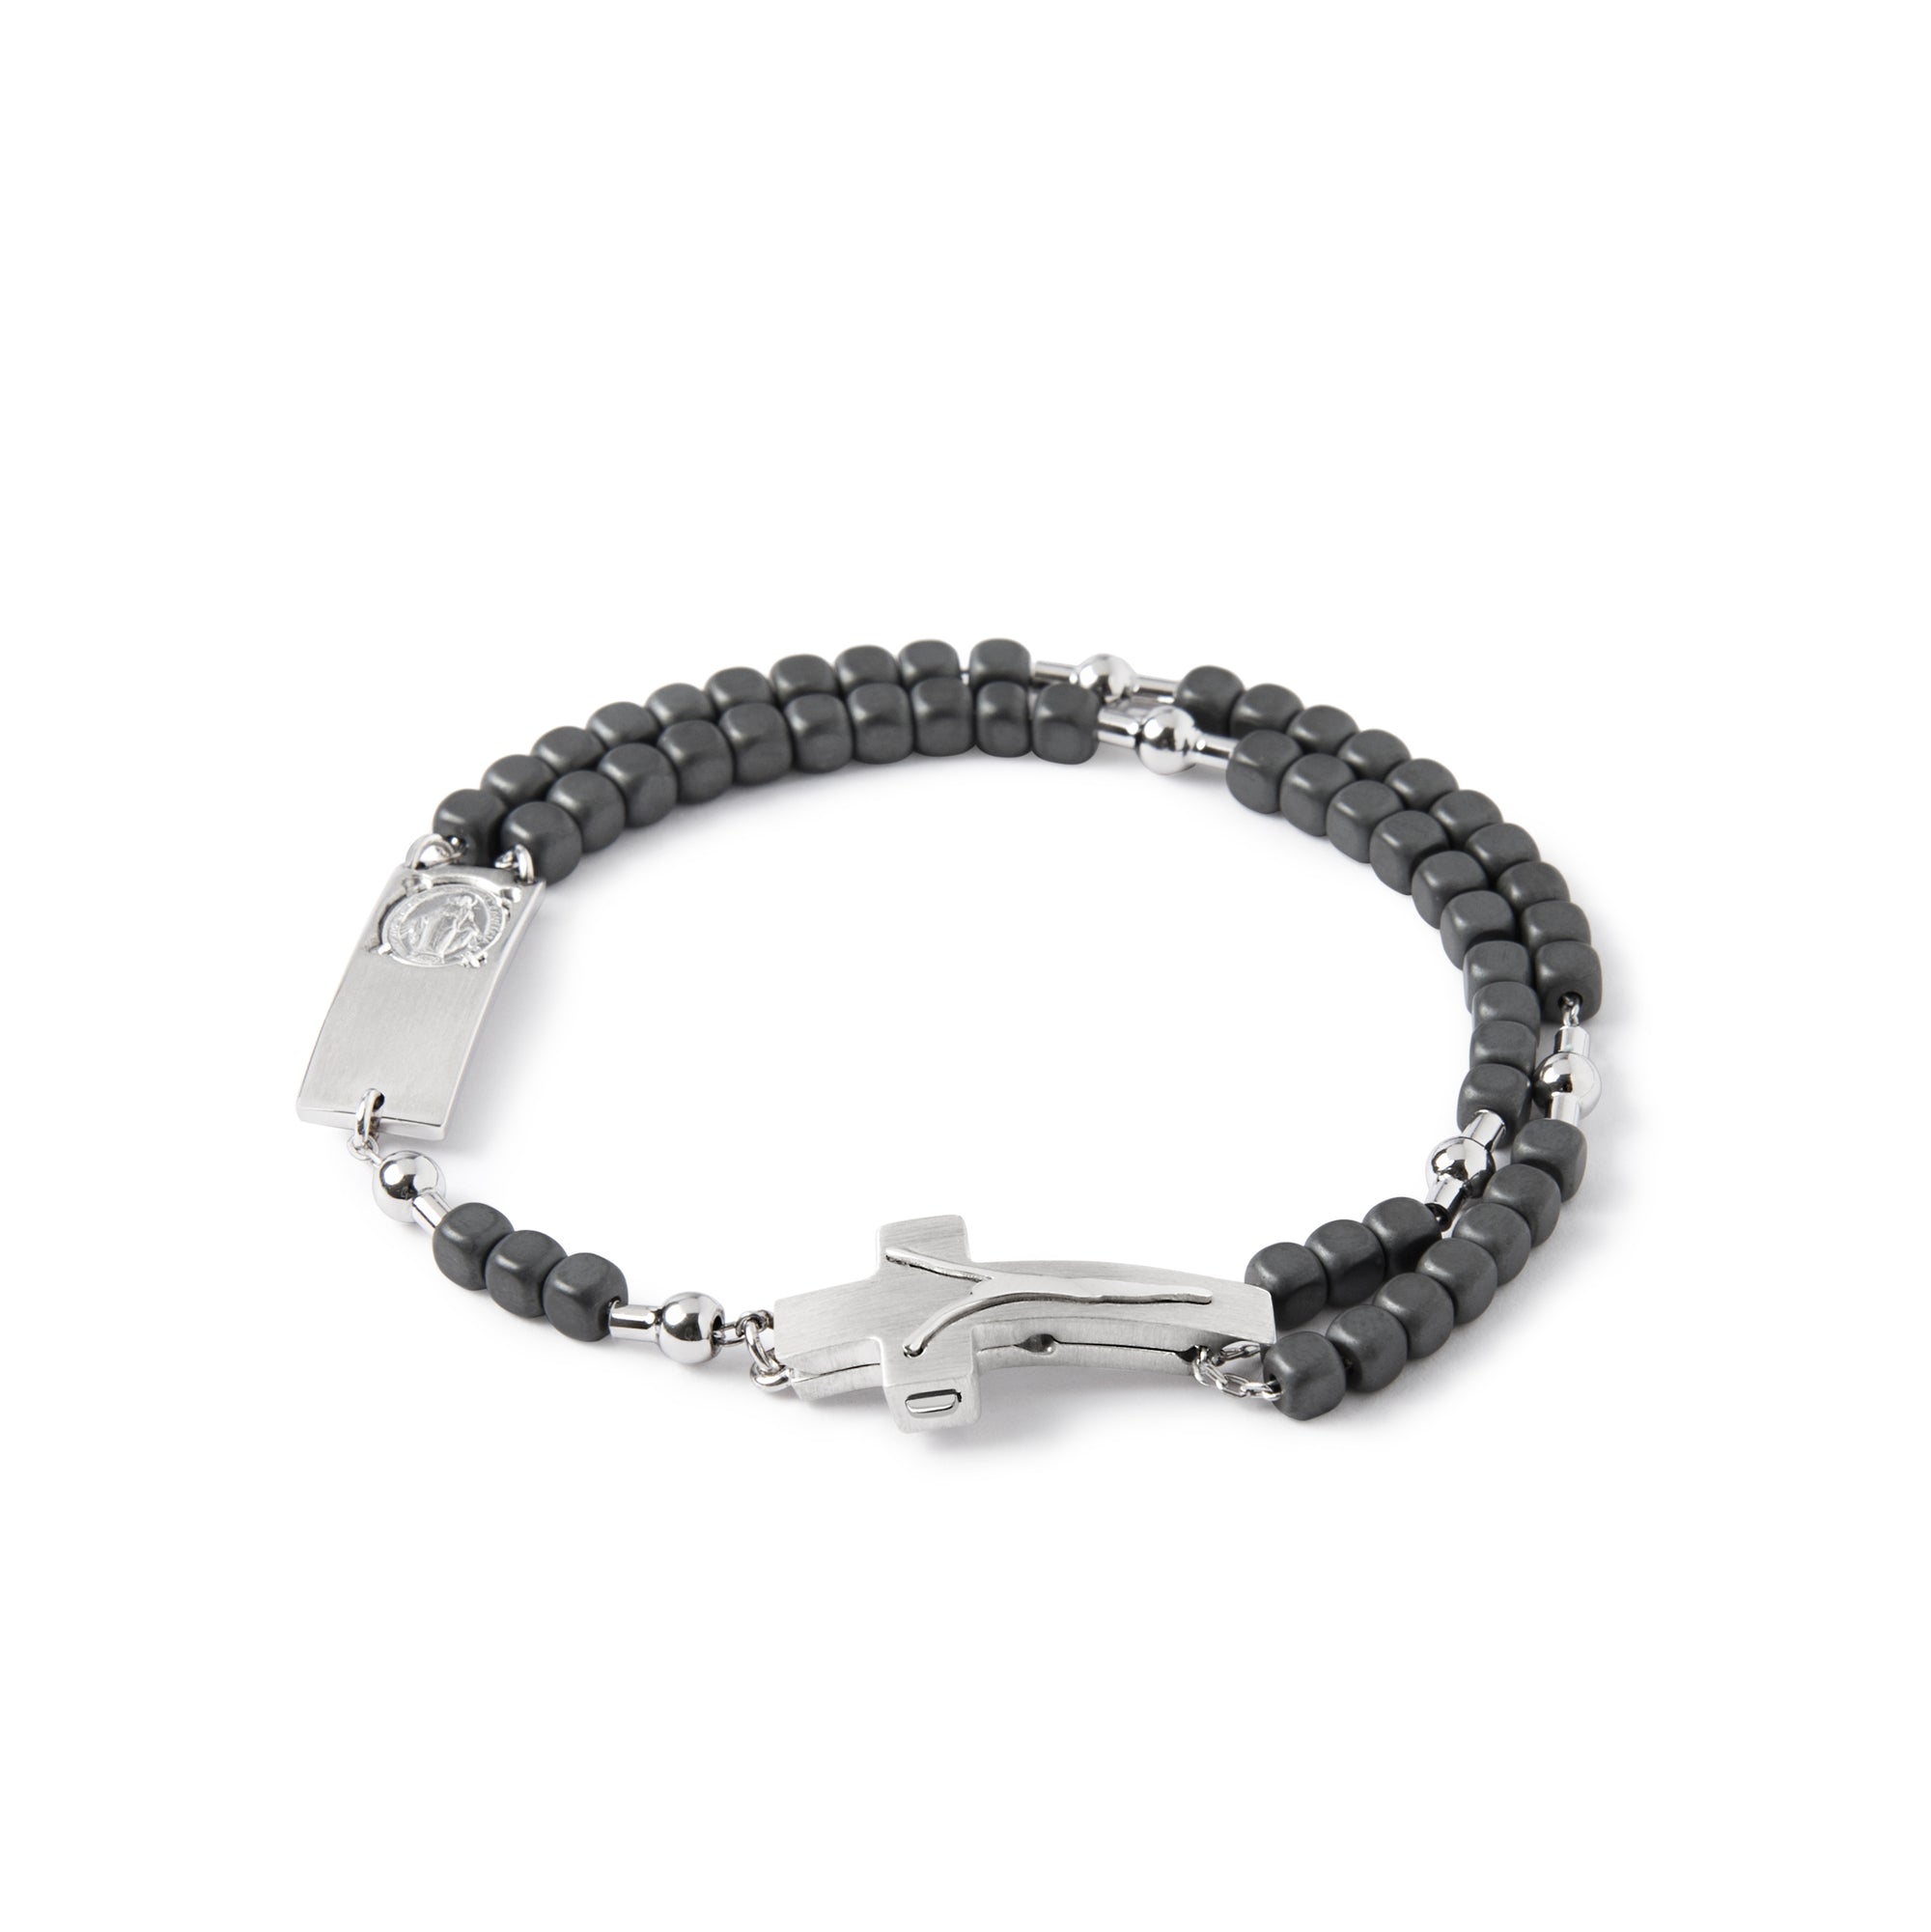 NEW CRUCIFIX WITH DOUBLE SAFETY BUTTON - ROSALET® SQUARE MATTE HEMATITE BEADS, STERLING SILVER & ROUND PATER, MODERN